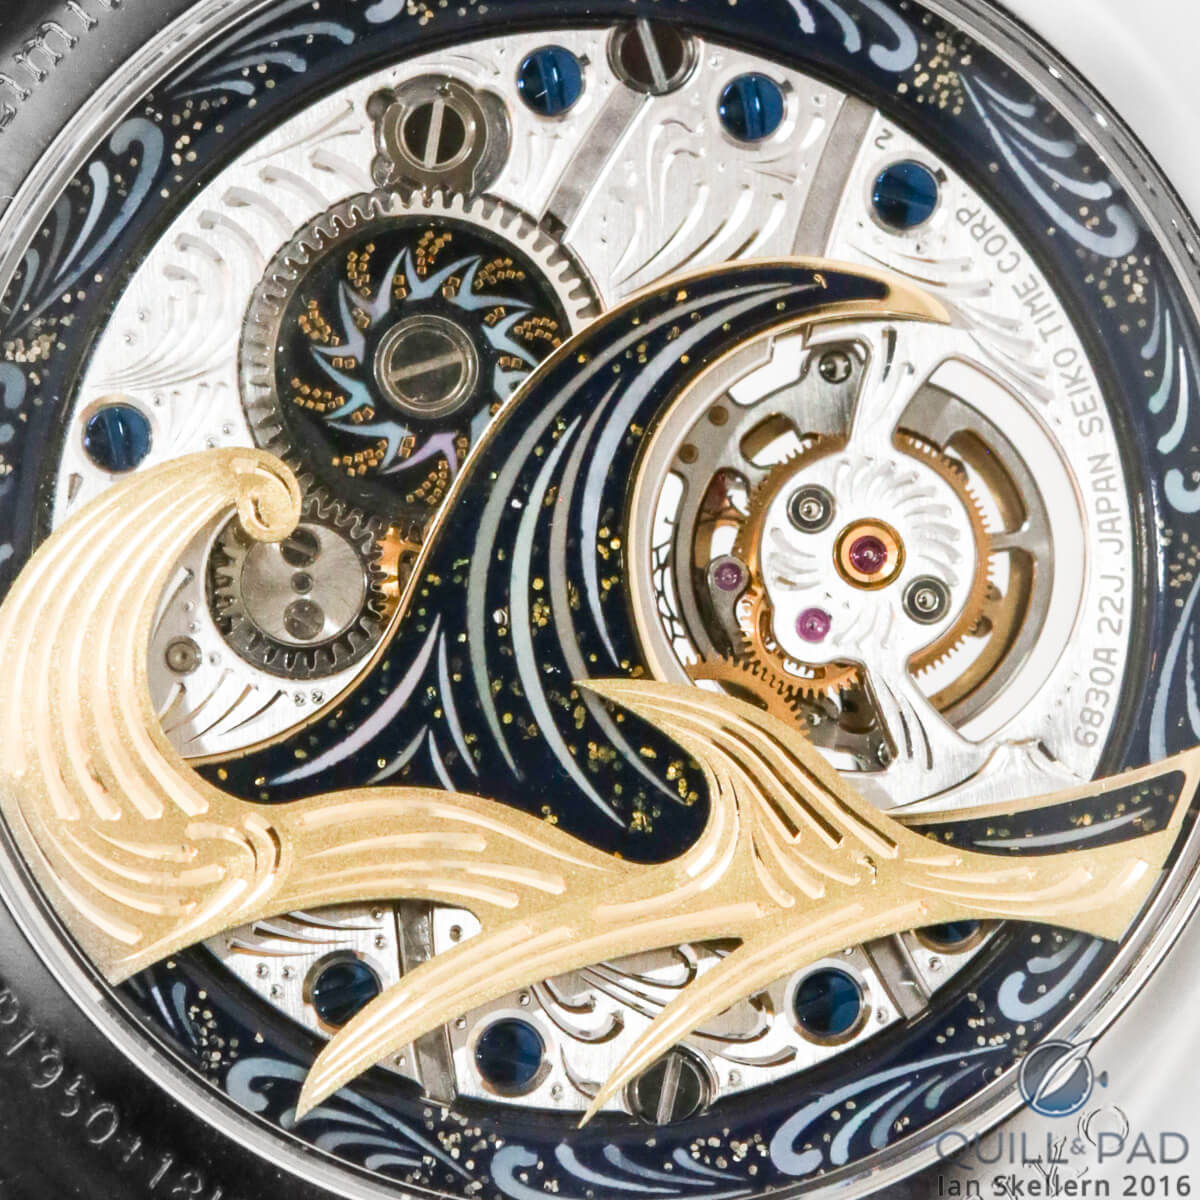 A close look at the incredible details on the highly decorated movement visible through the display back of the Seiko Credor Fugaku Tourbillon